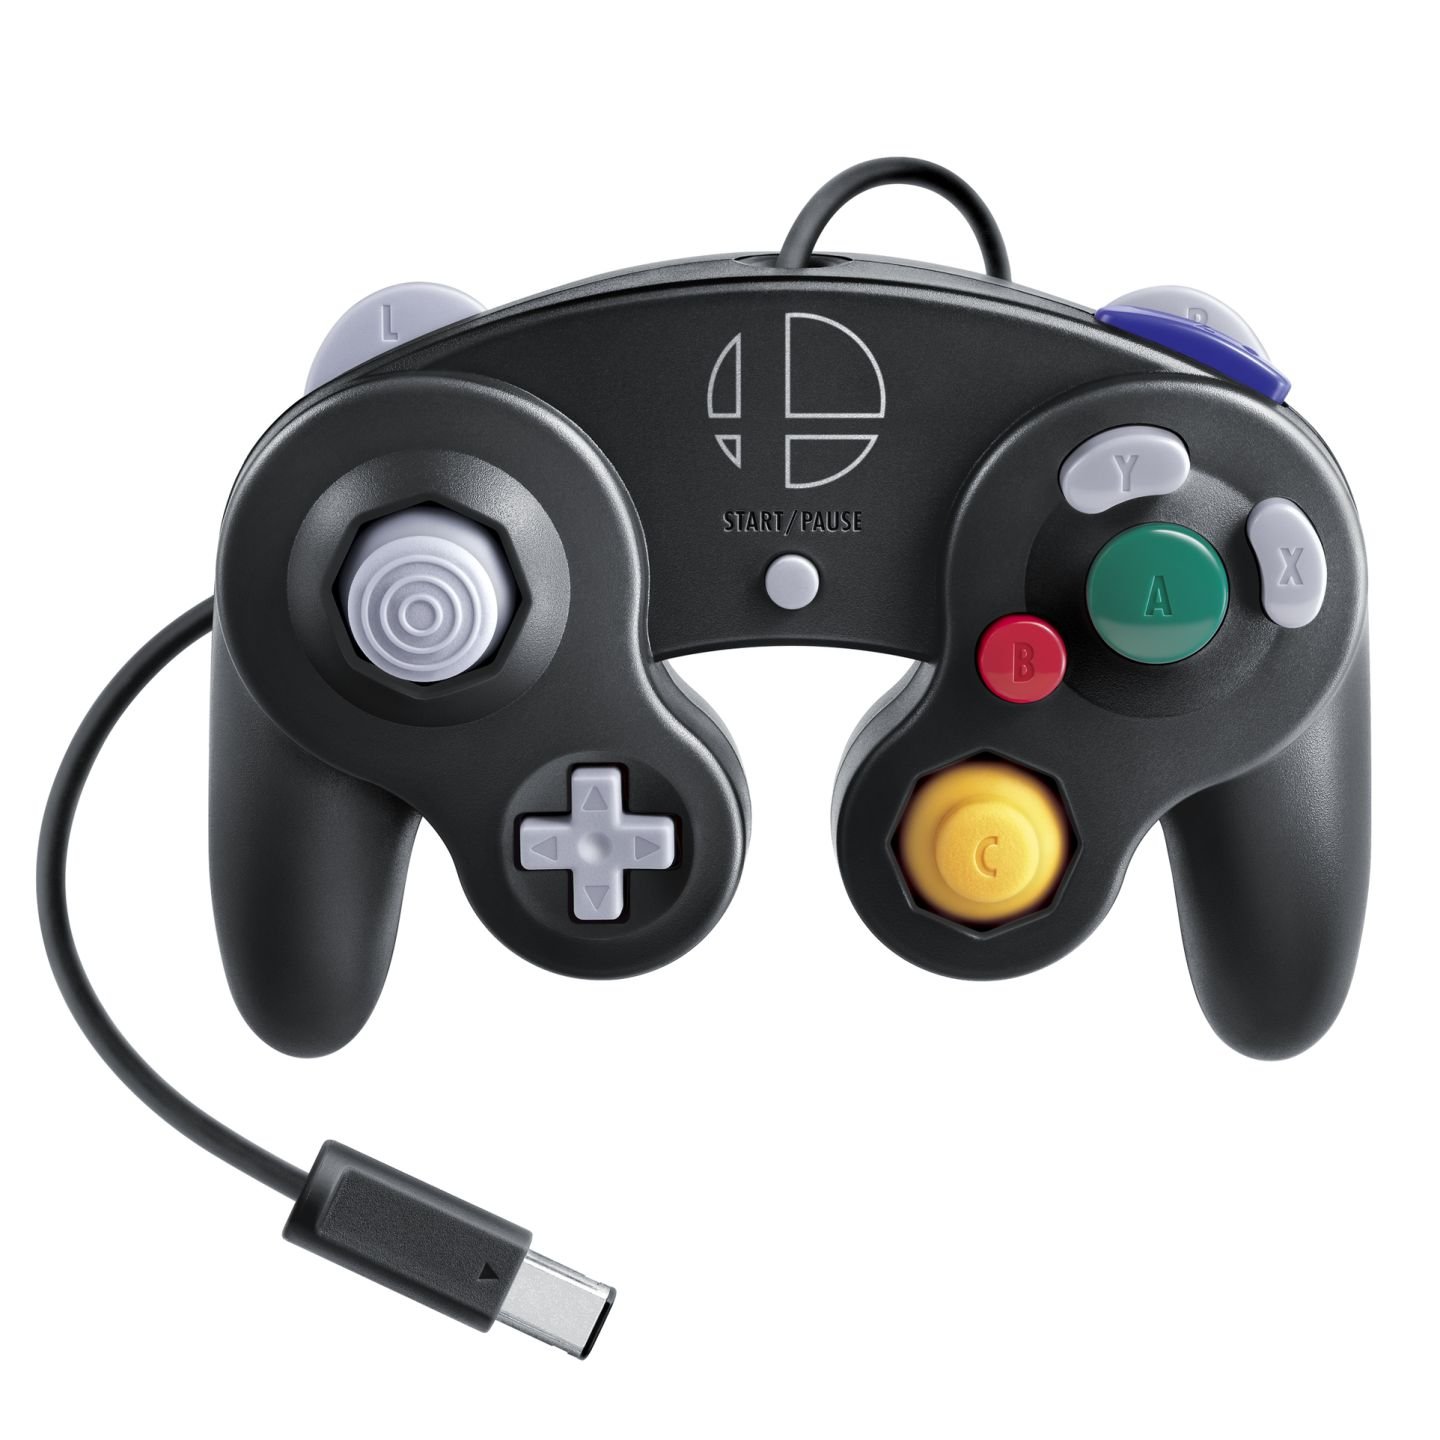 wii games that can be played with gamecube controller